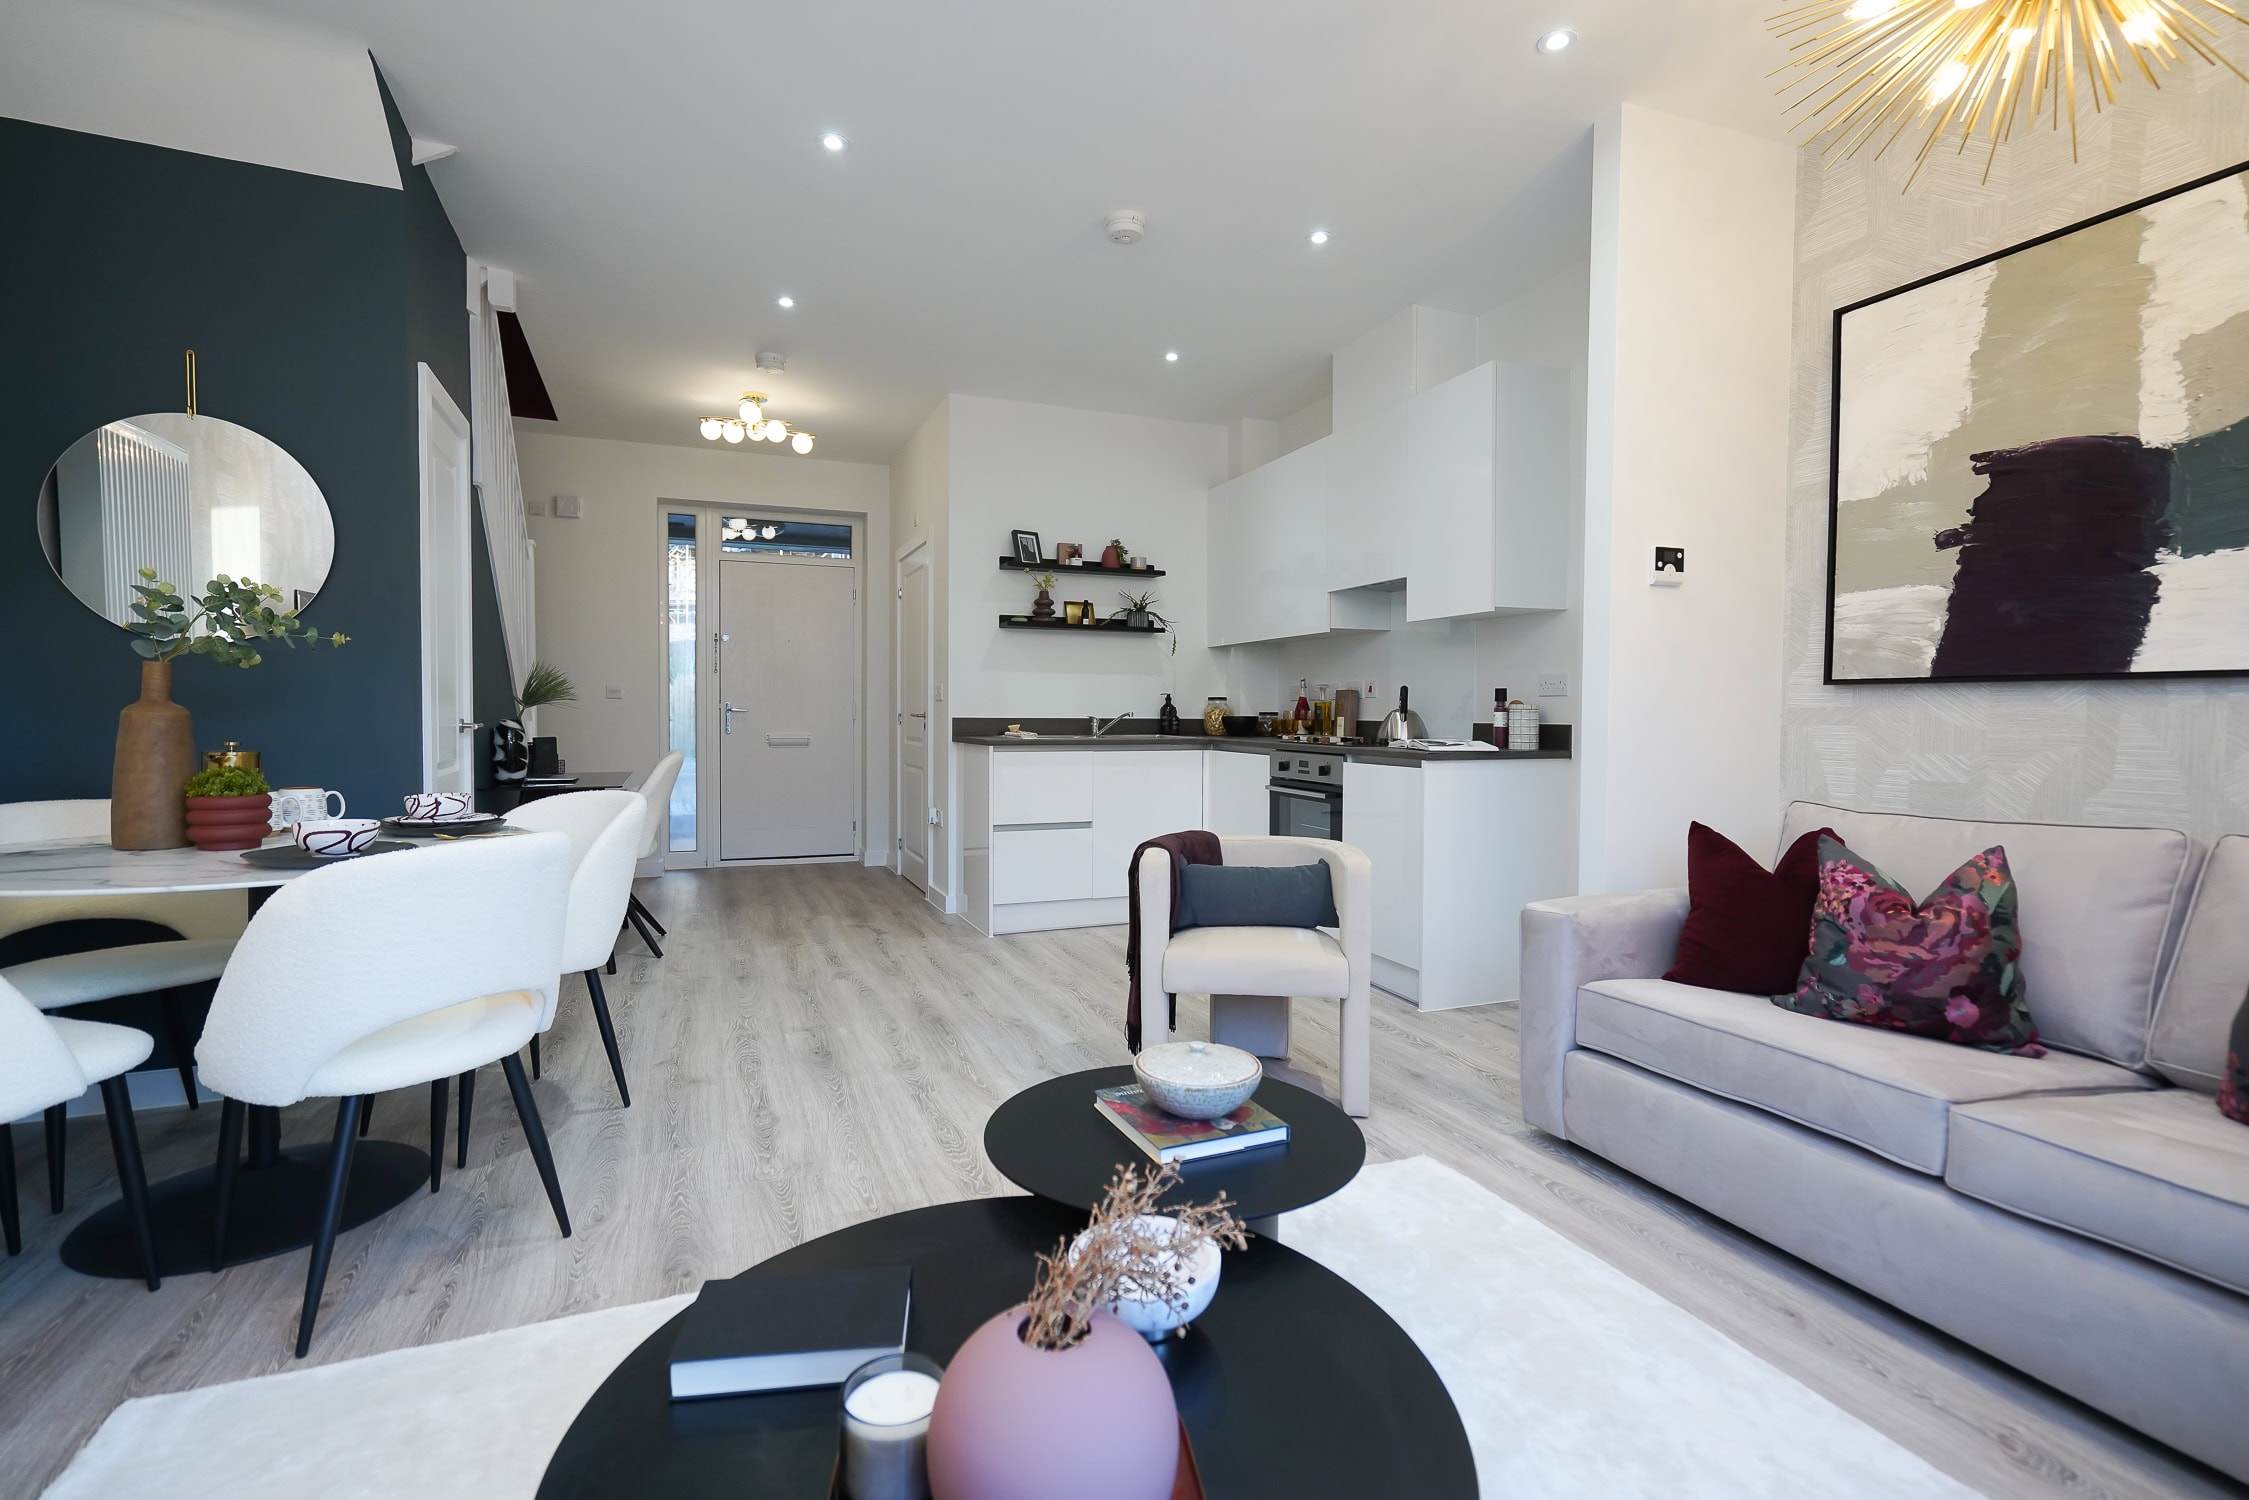 Belgrave Village, Birmingham - available to purchase through Shared Ownership on Share to Buy!